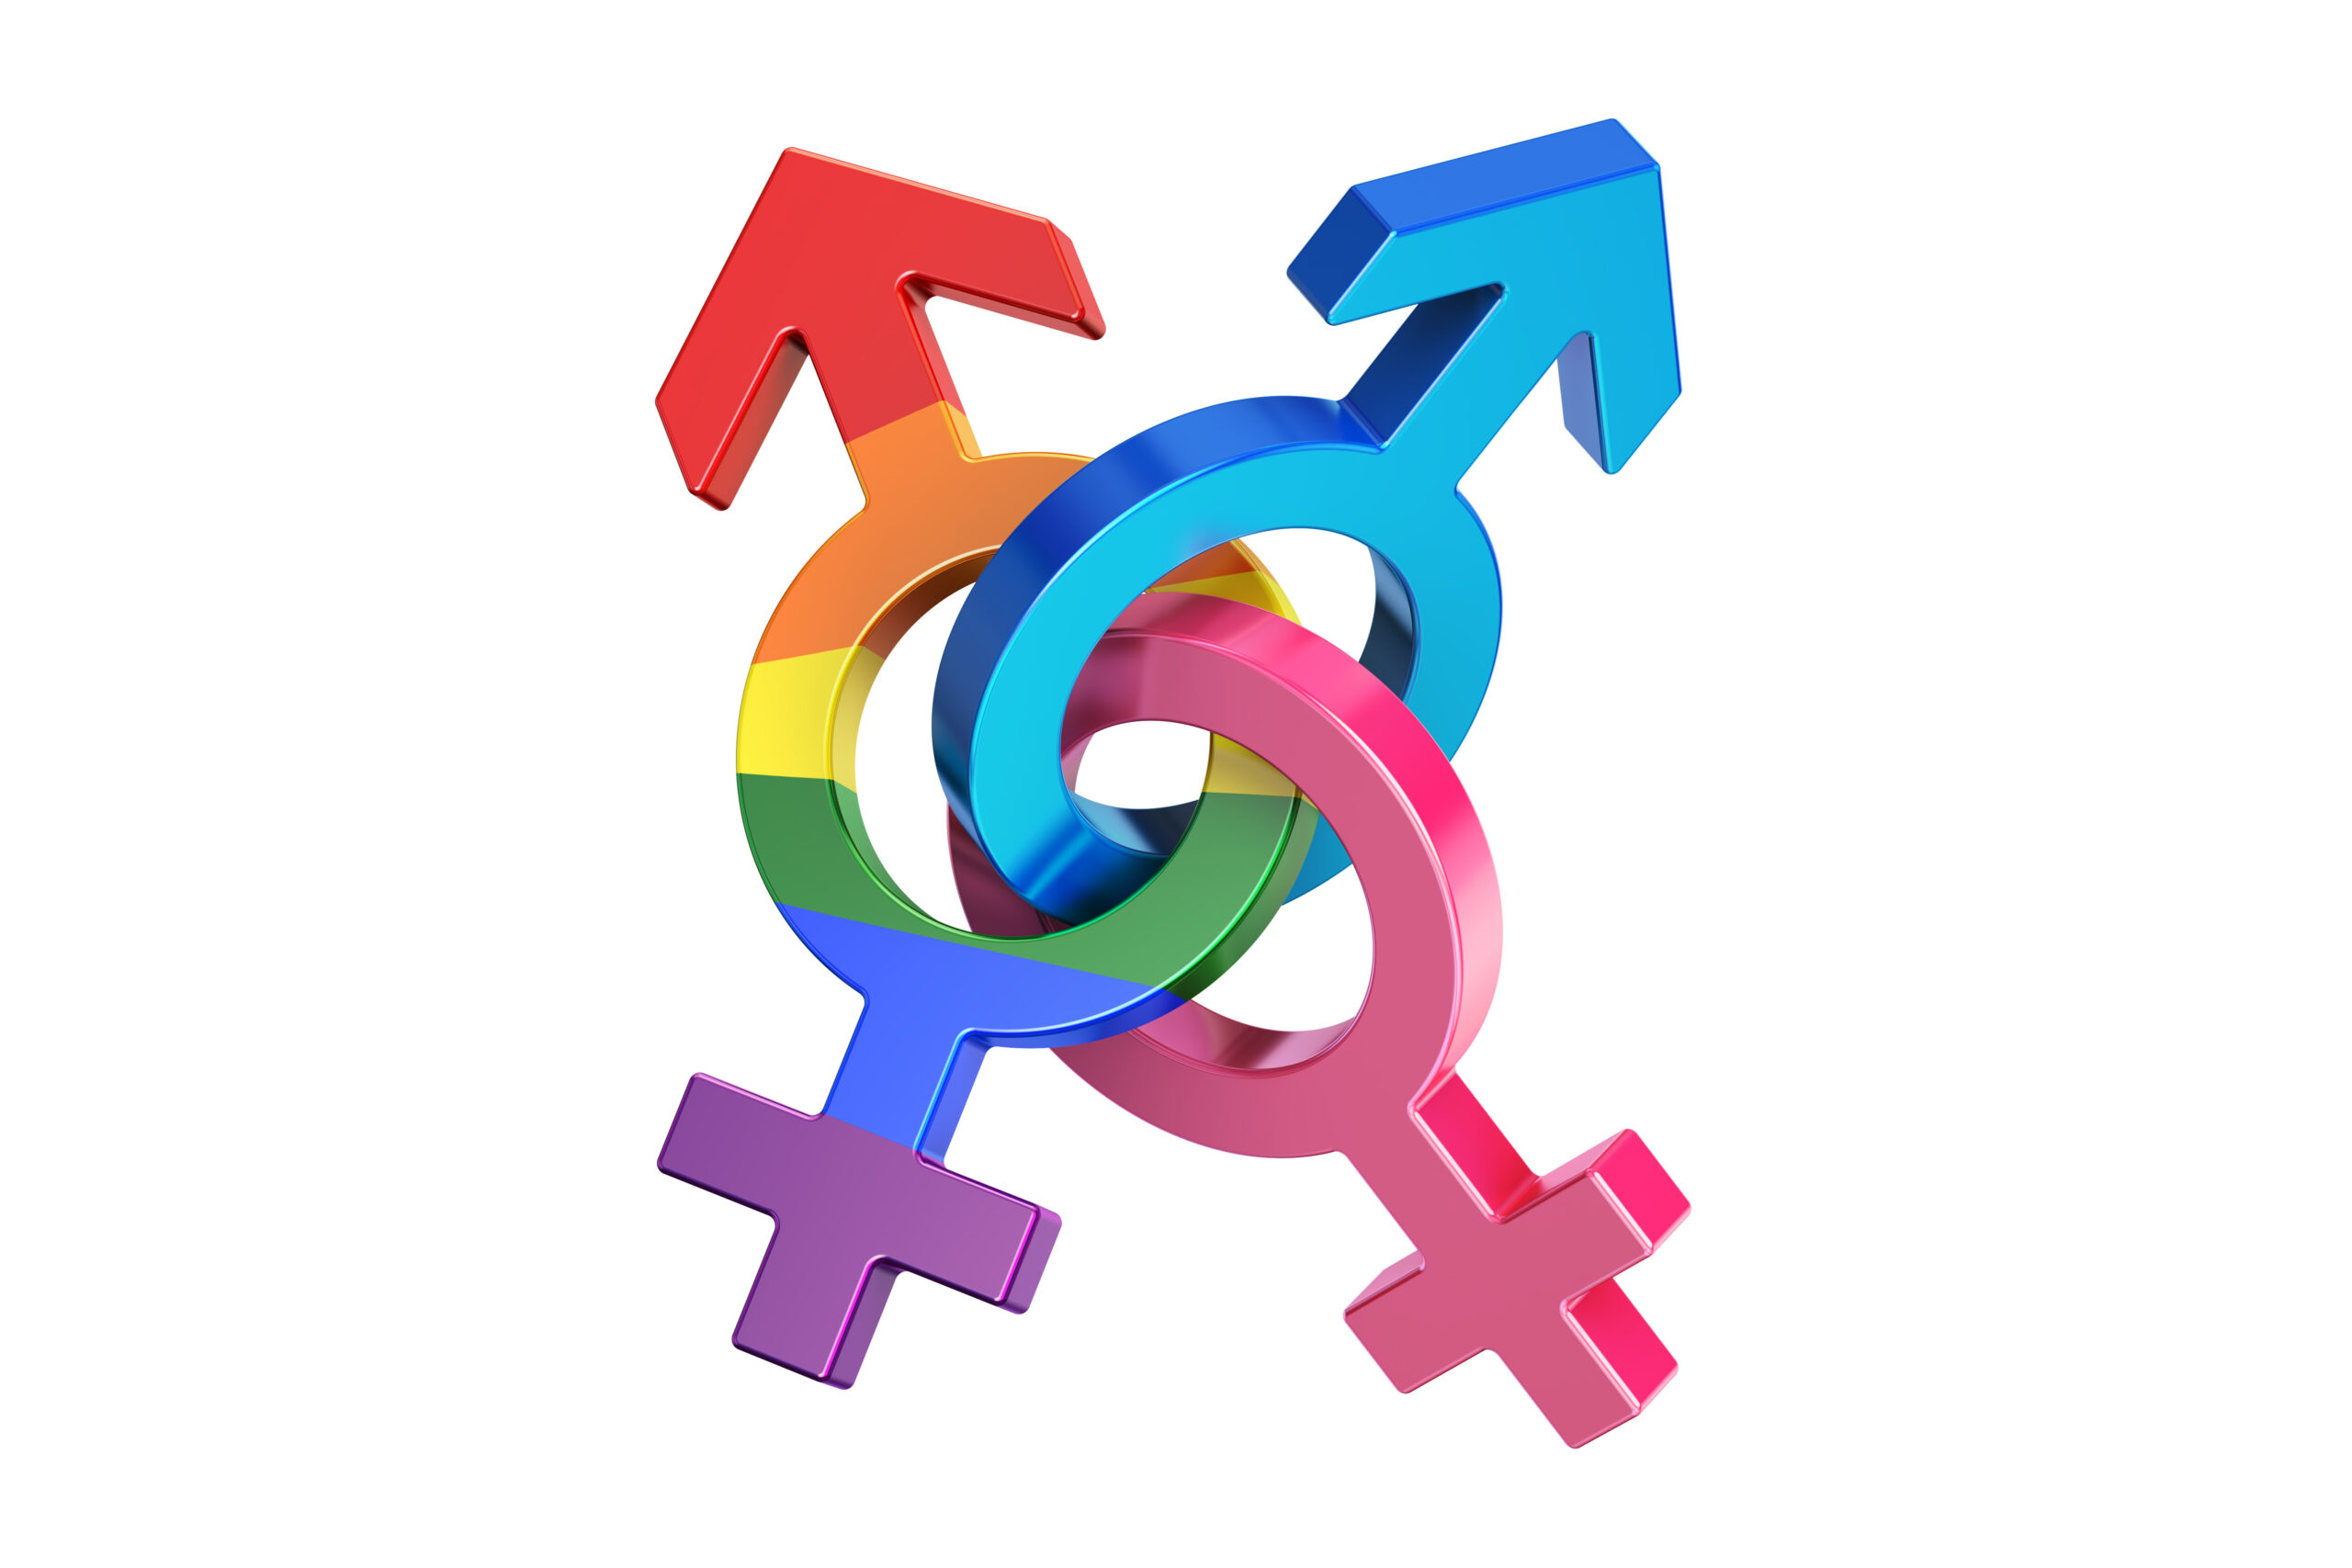 Featured image for “The Relationship between Gender Affirming Medical Interventions and Social Anxiety Among Transgender or Gender Non-Conforming Individuals”